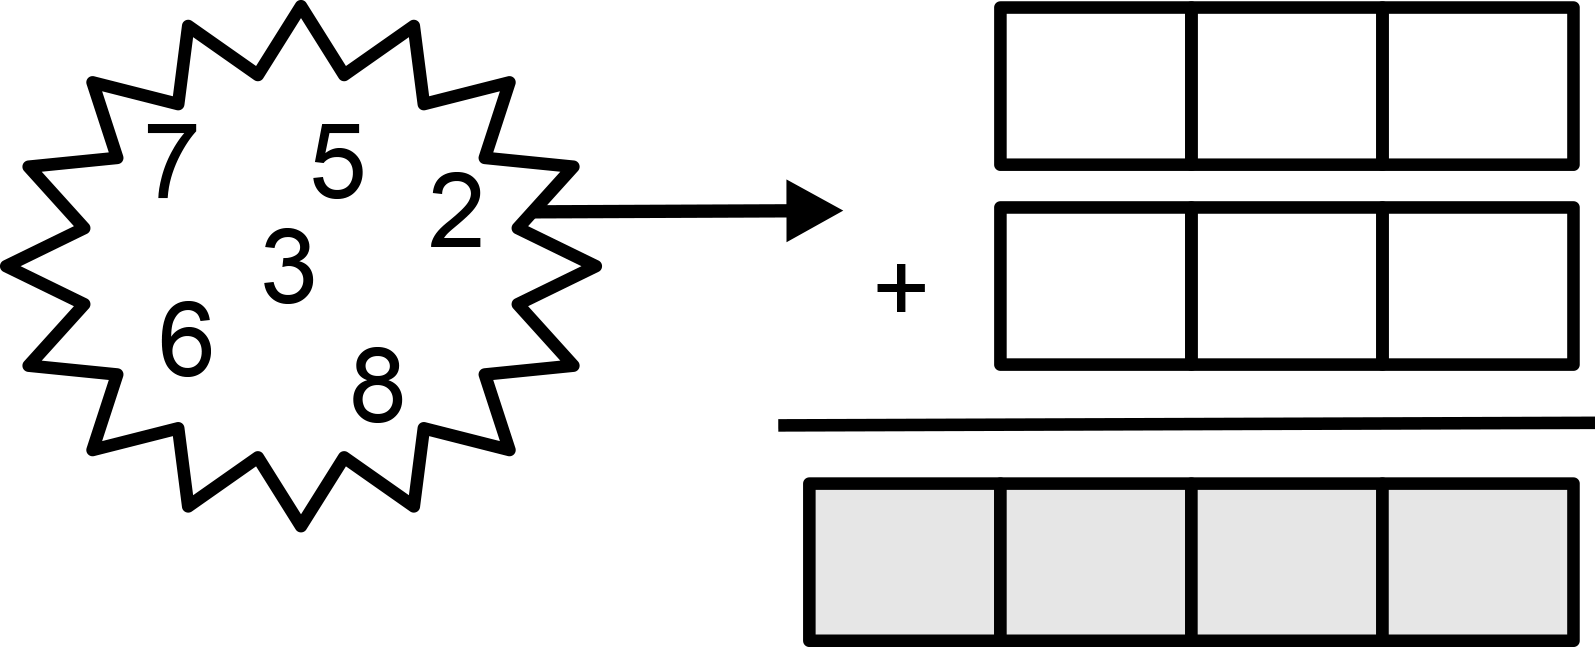 The numbers are 2, 3, 5, 6, 7, and 8. Six white boxes represent the digits of two three-digit numbers. The two three-digit numbers are added and the sum is a four-digit number.